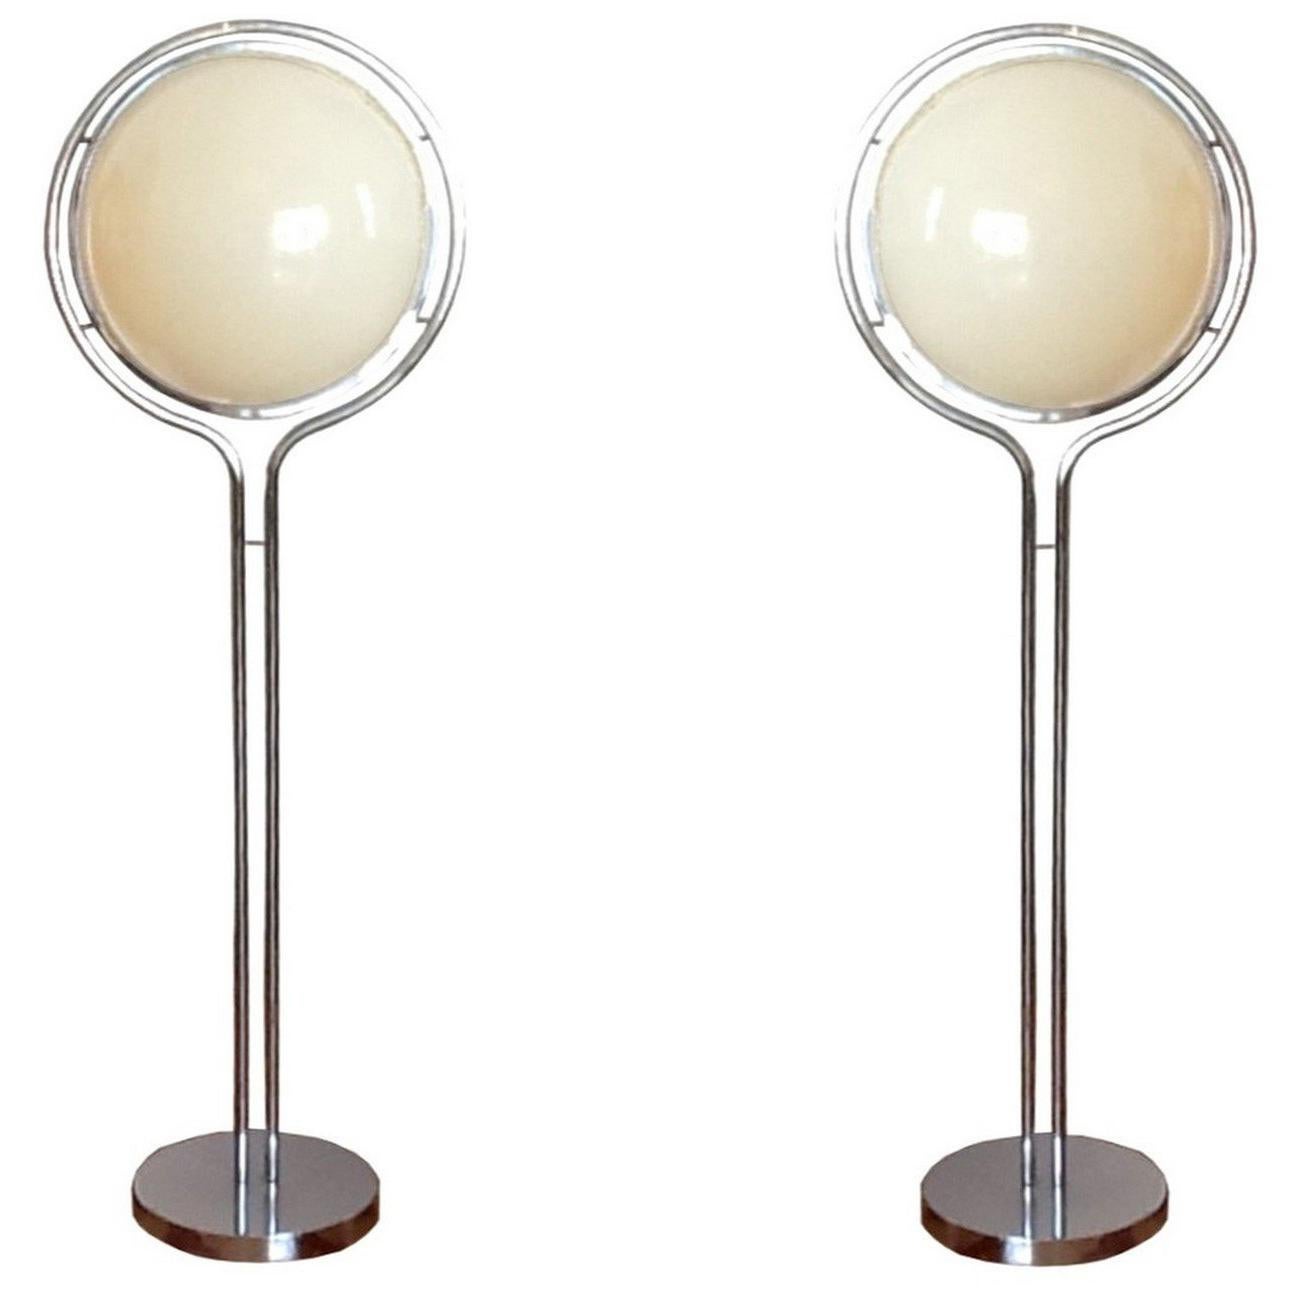 Rare Pair of Floor Lamps by Garrault and Delord, France, 1971 at 1stDibs |  garrault delord lamp, garrault-delord design, lampadaire garrault delord